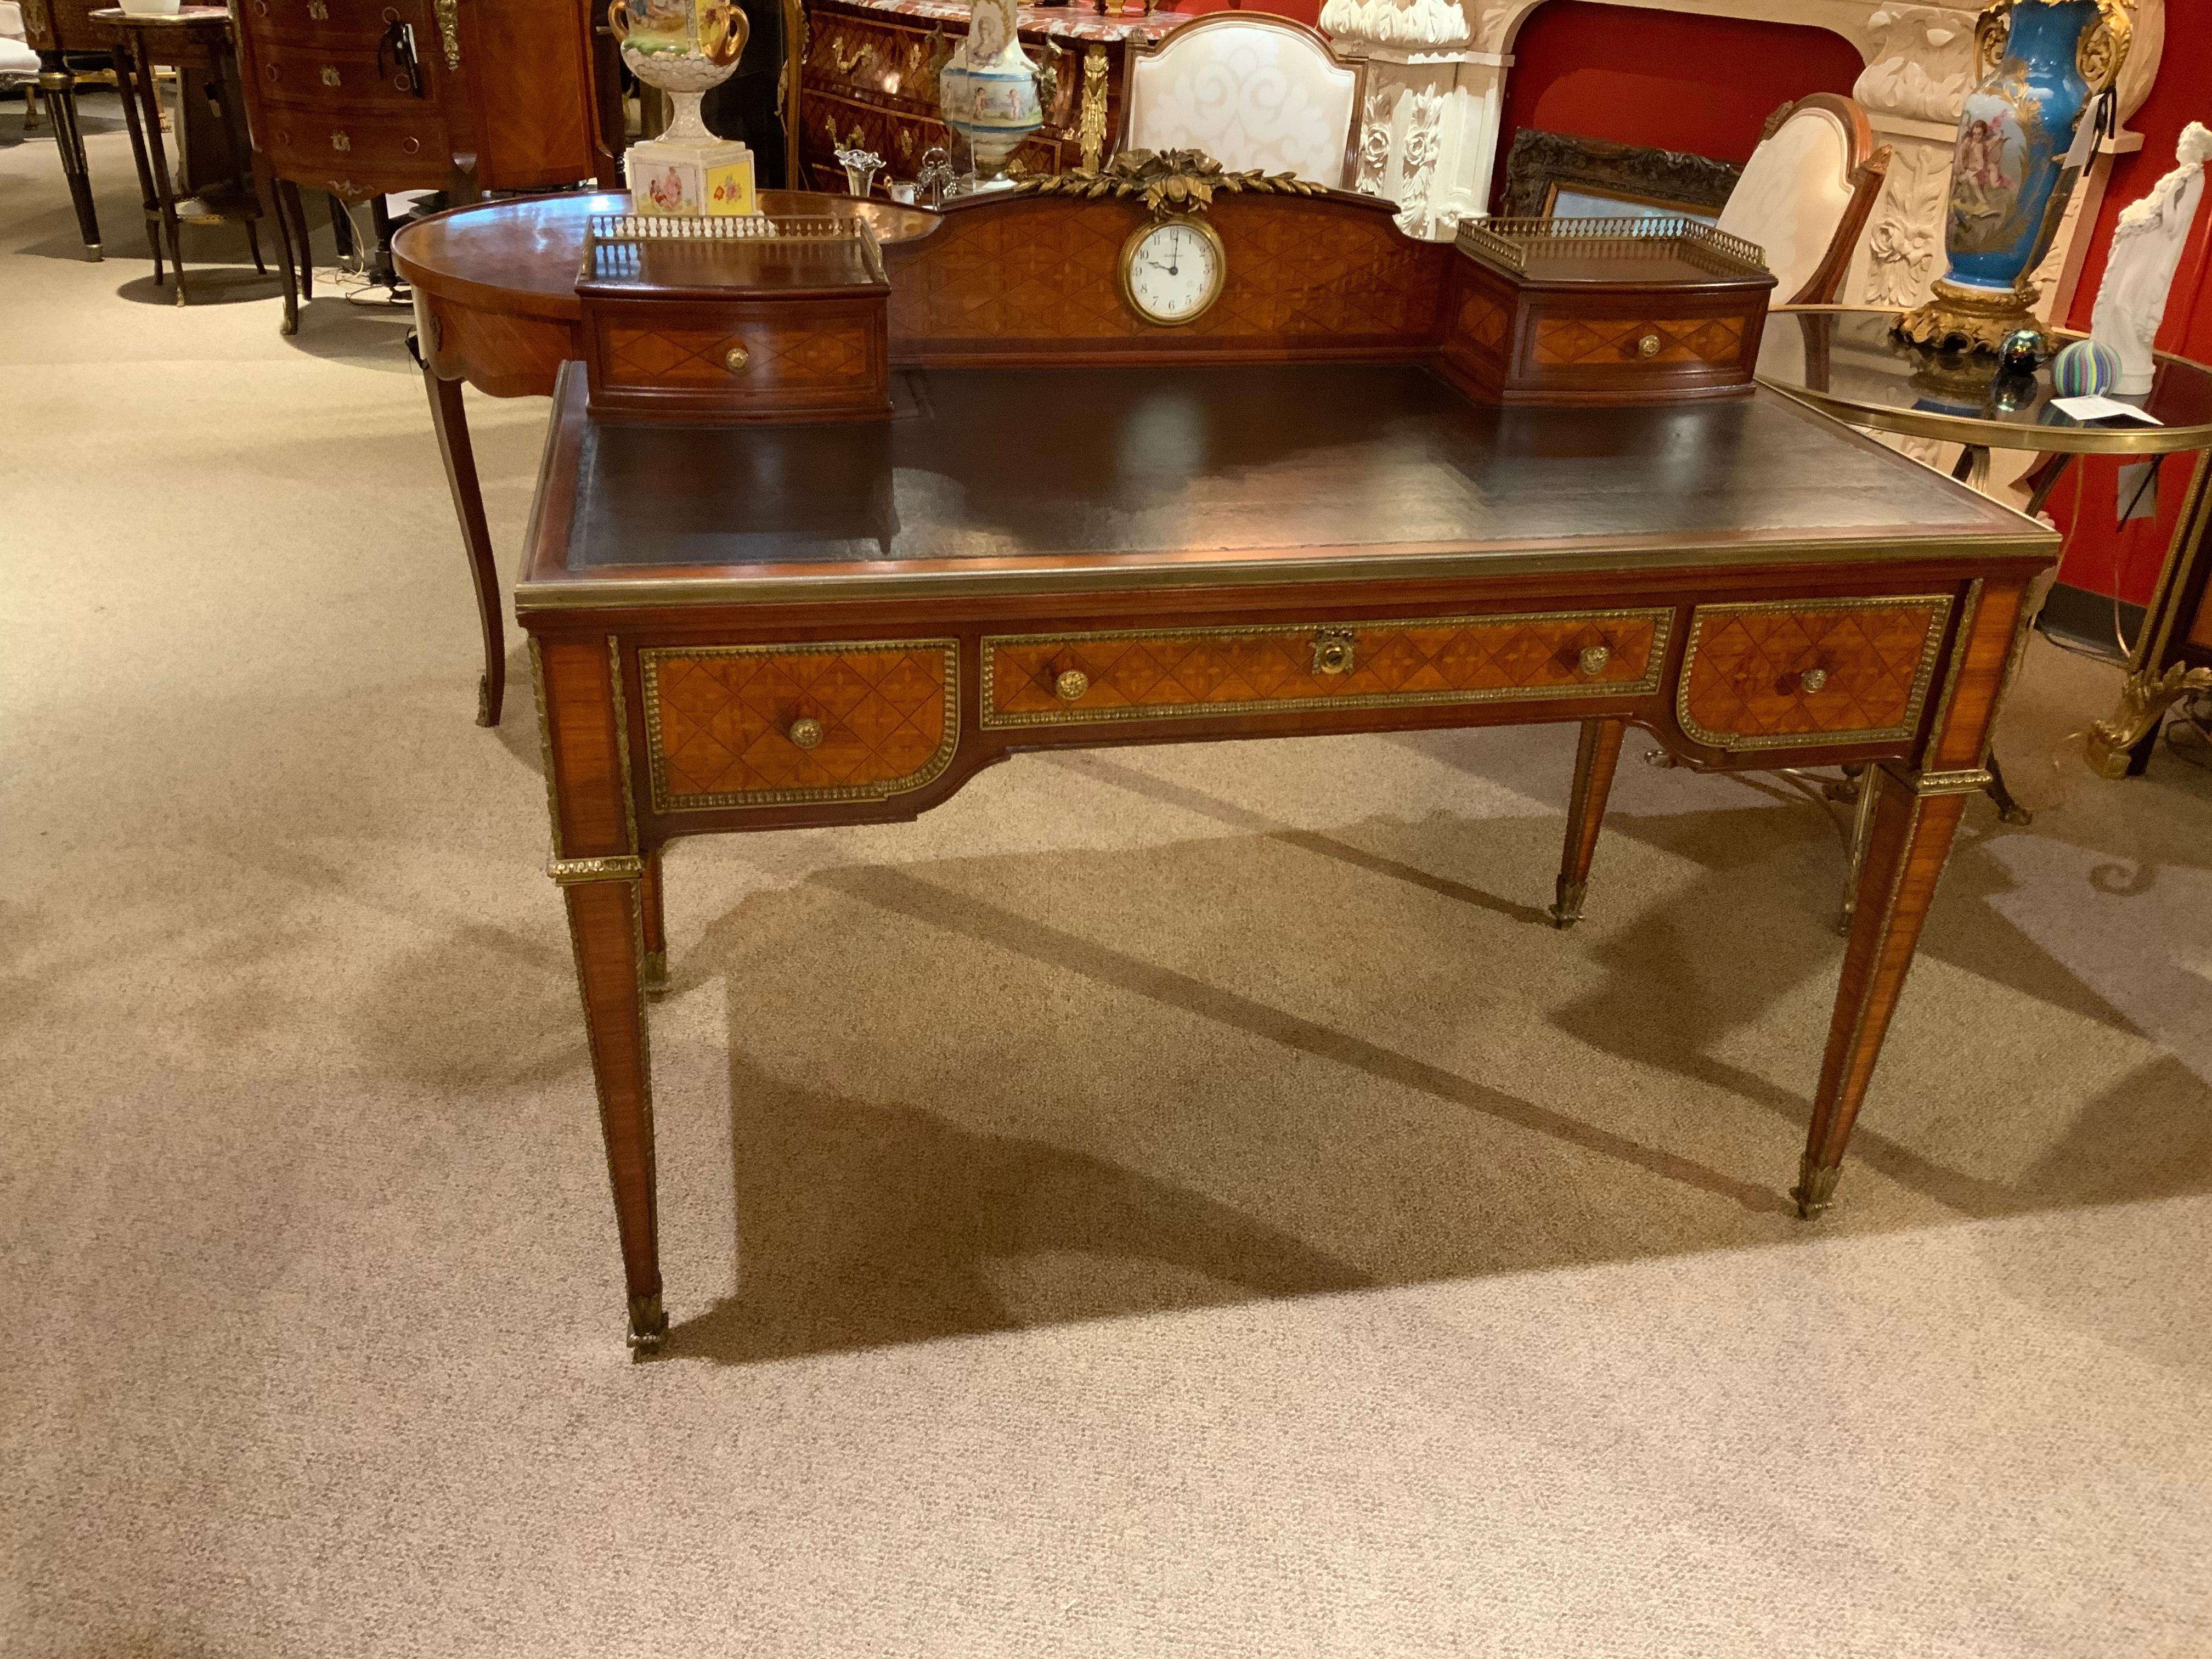 Nicely inlaid parquetry and marquetry with ornate bronze mounts. Black leather top
Three drawers across the front and two petite cabinets on the surface with drawers.
A clock is mounted at the center marked Seth Thomas.
Signed Paris on the center